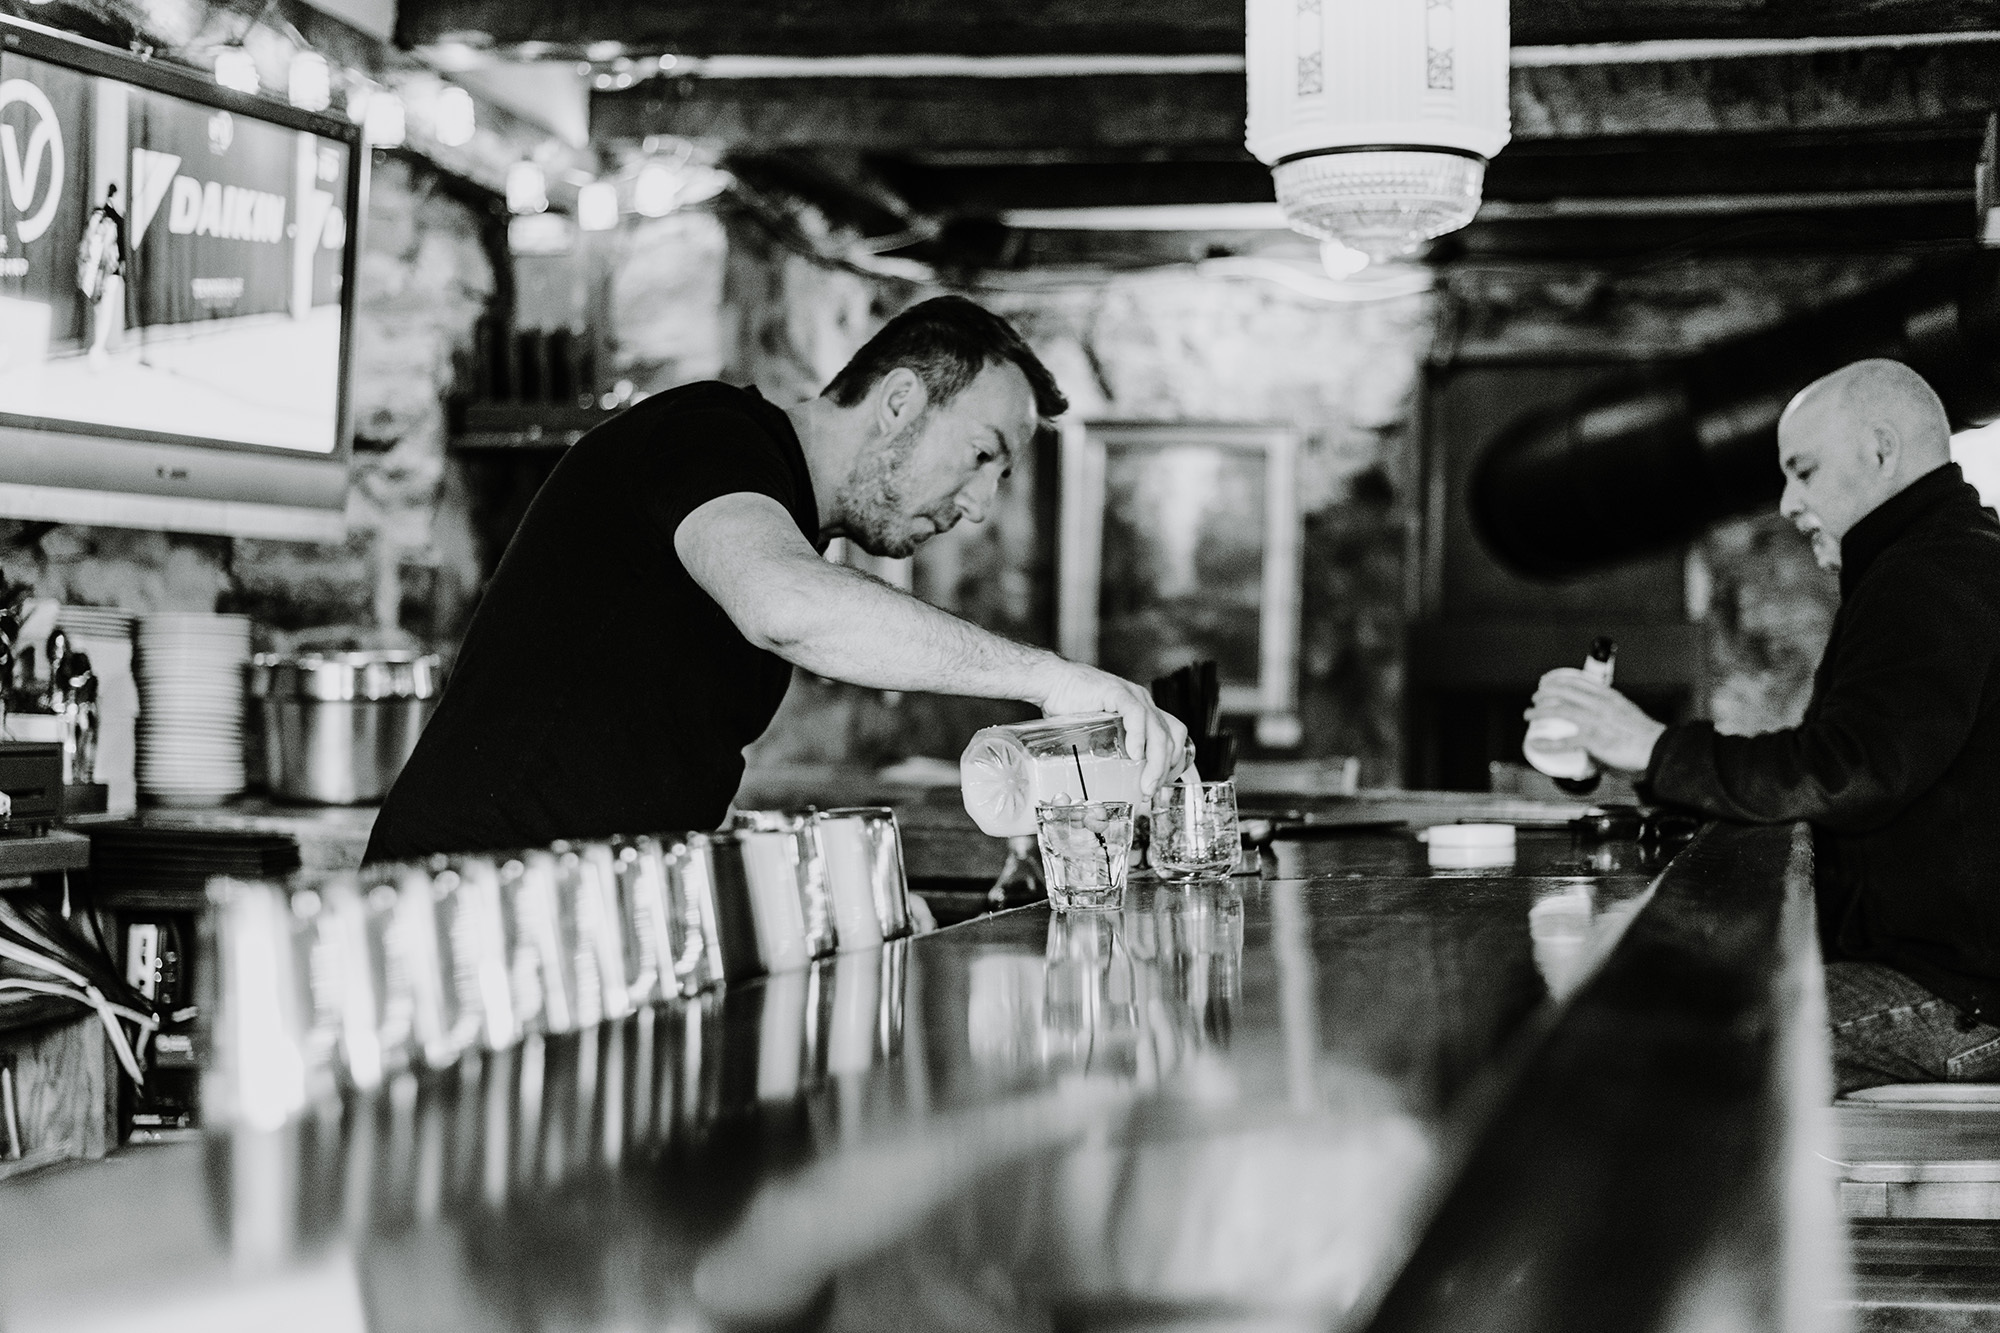 Bartender Tony pouring a drink